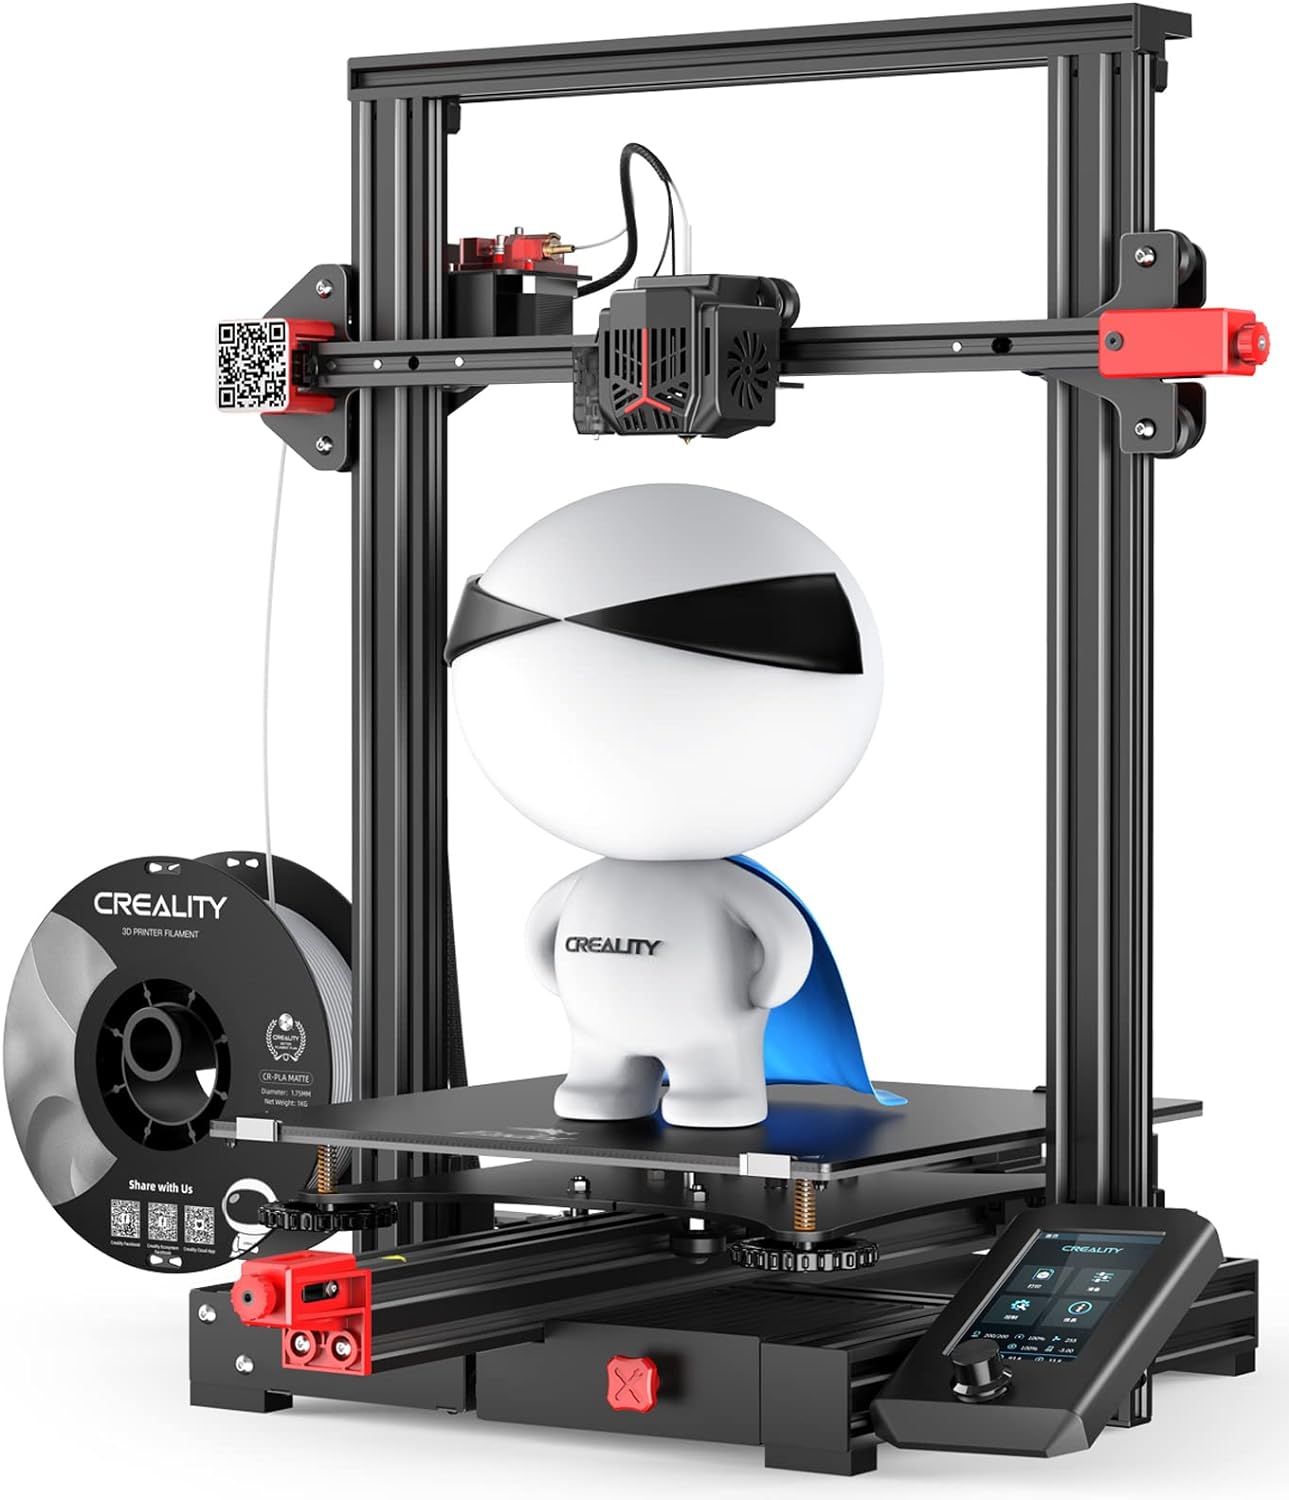 creality-ender-3-max-neo-3d-printer-cr-touch-auto-leveling-dual-z-axis-full-metal-extruder-silent-mainboard-filament-sen Creality Ender 3 Max Neo 3D Printer Review